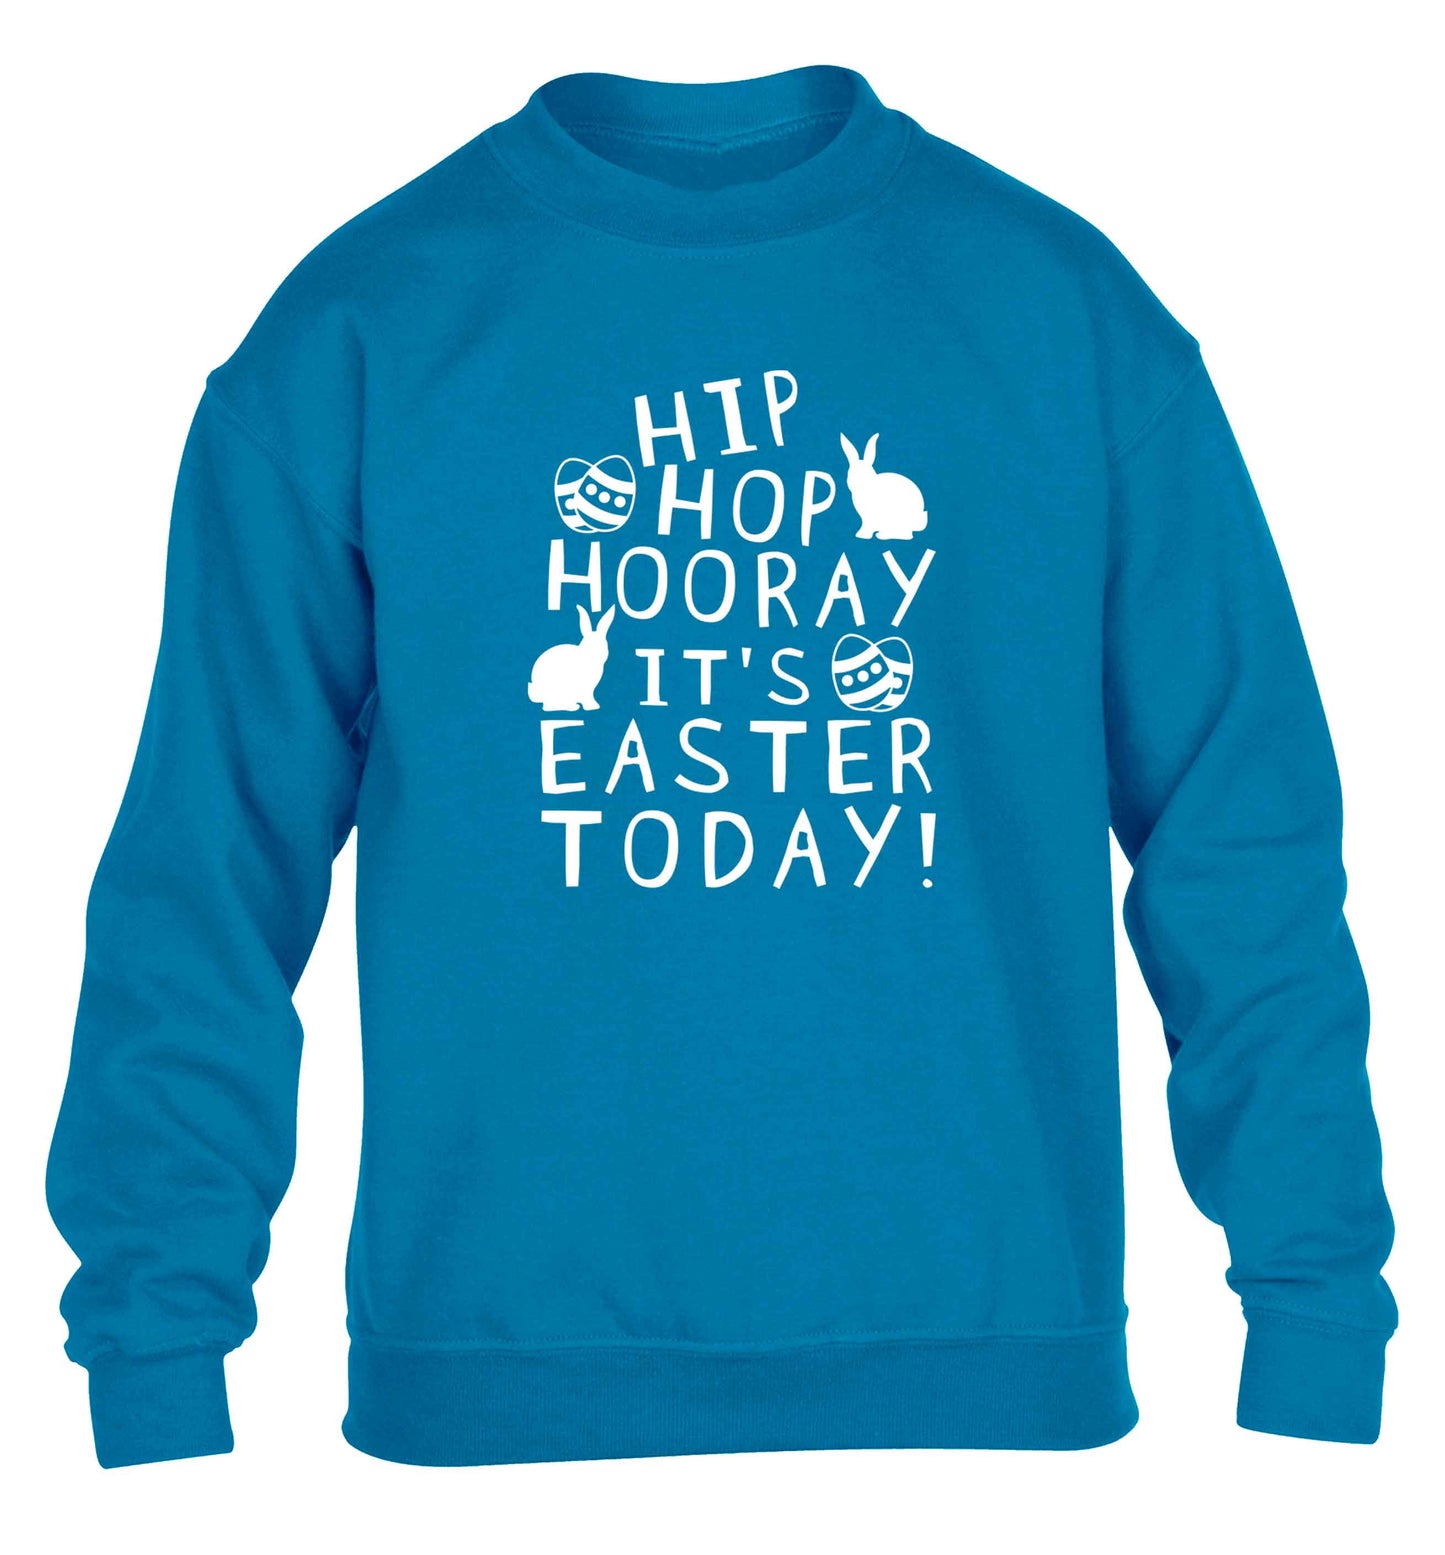 Hip hip hooray it's Easter today! children's blue sweater 12-13 Years